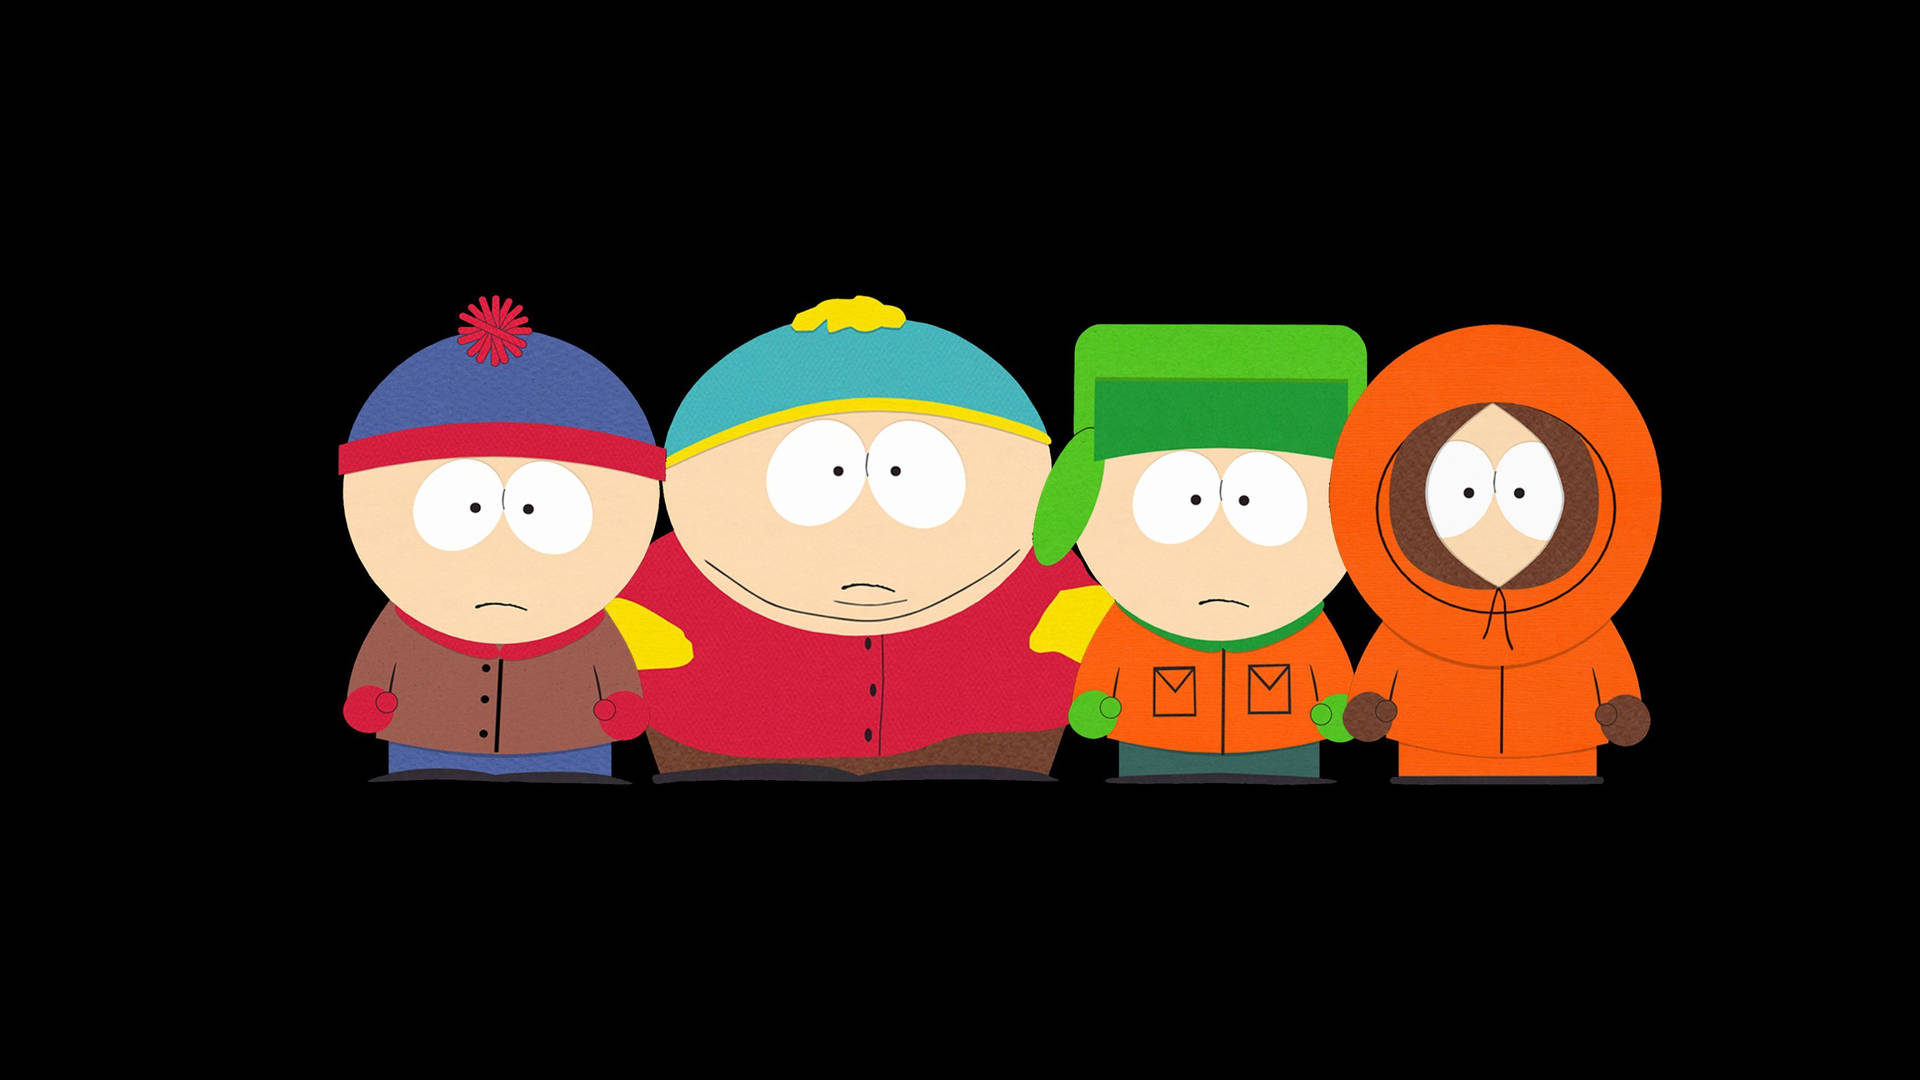 South Park wallpaper by MaxxSick  Download on ZEDGE  b578